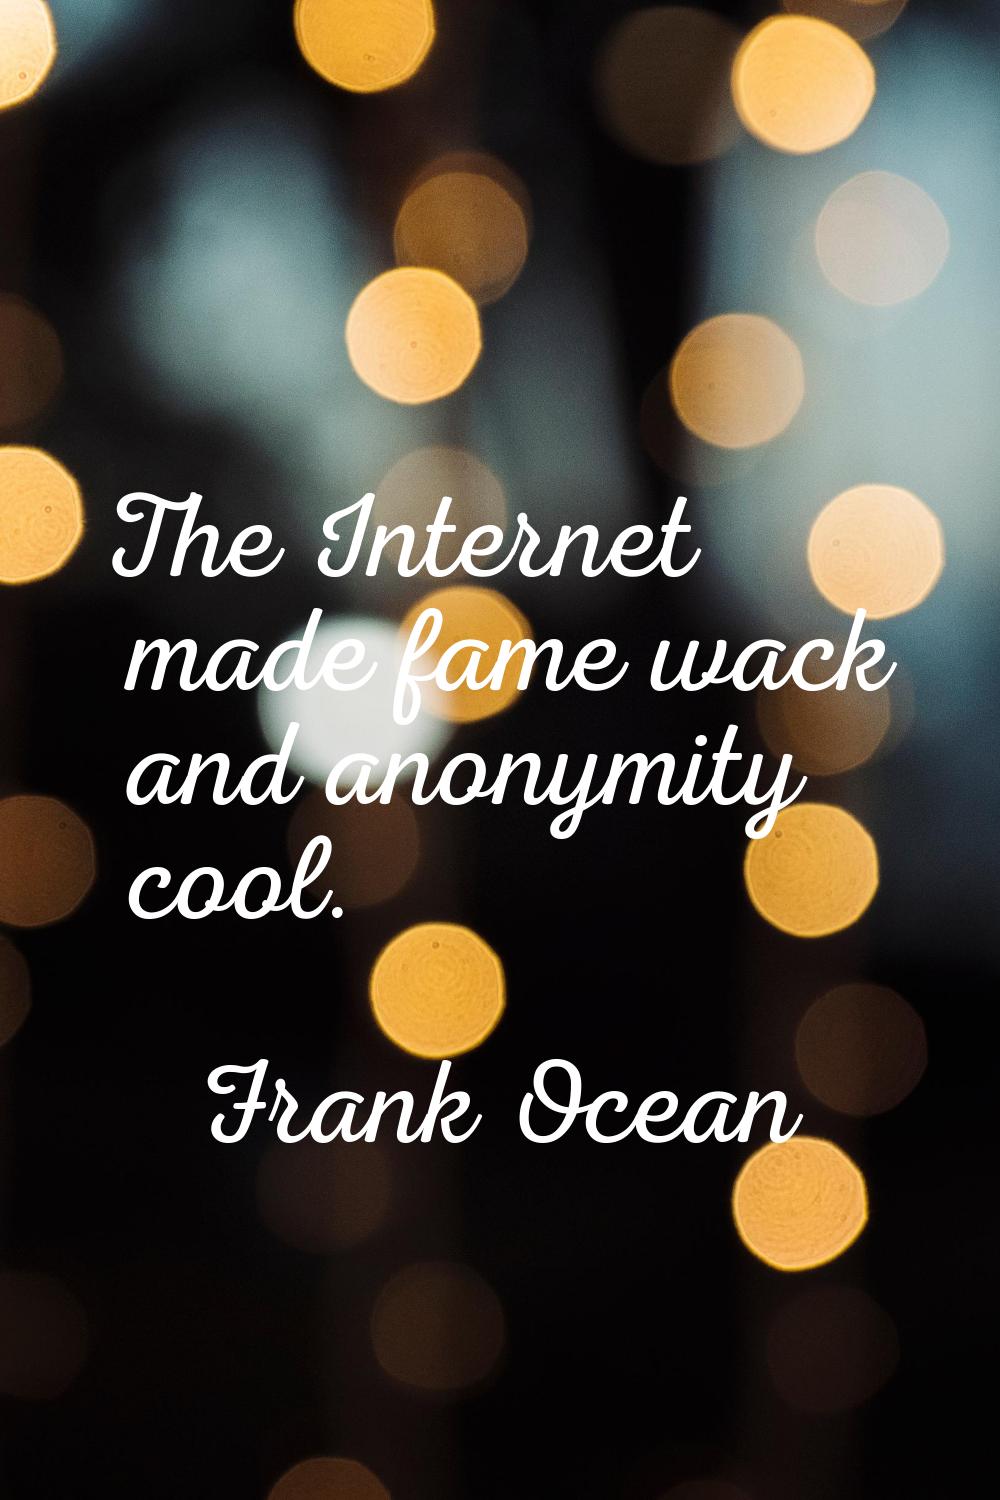 The Internet made fame wack and anonymity cool.